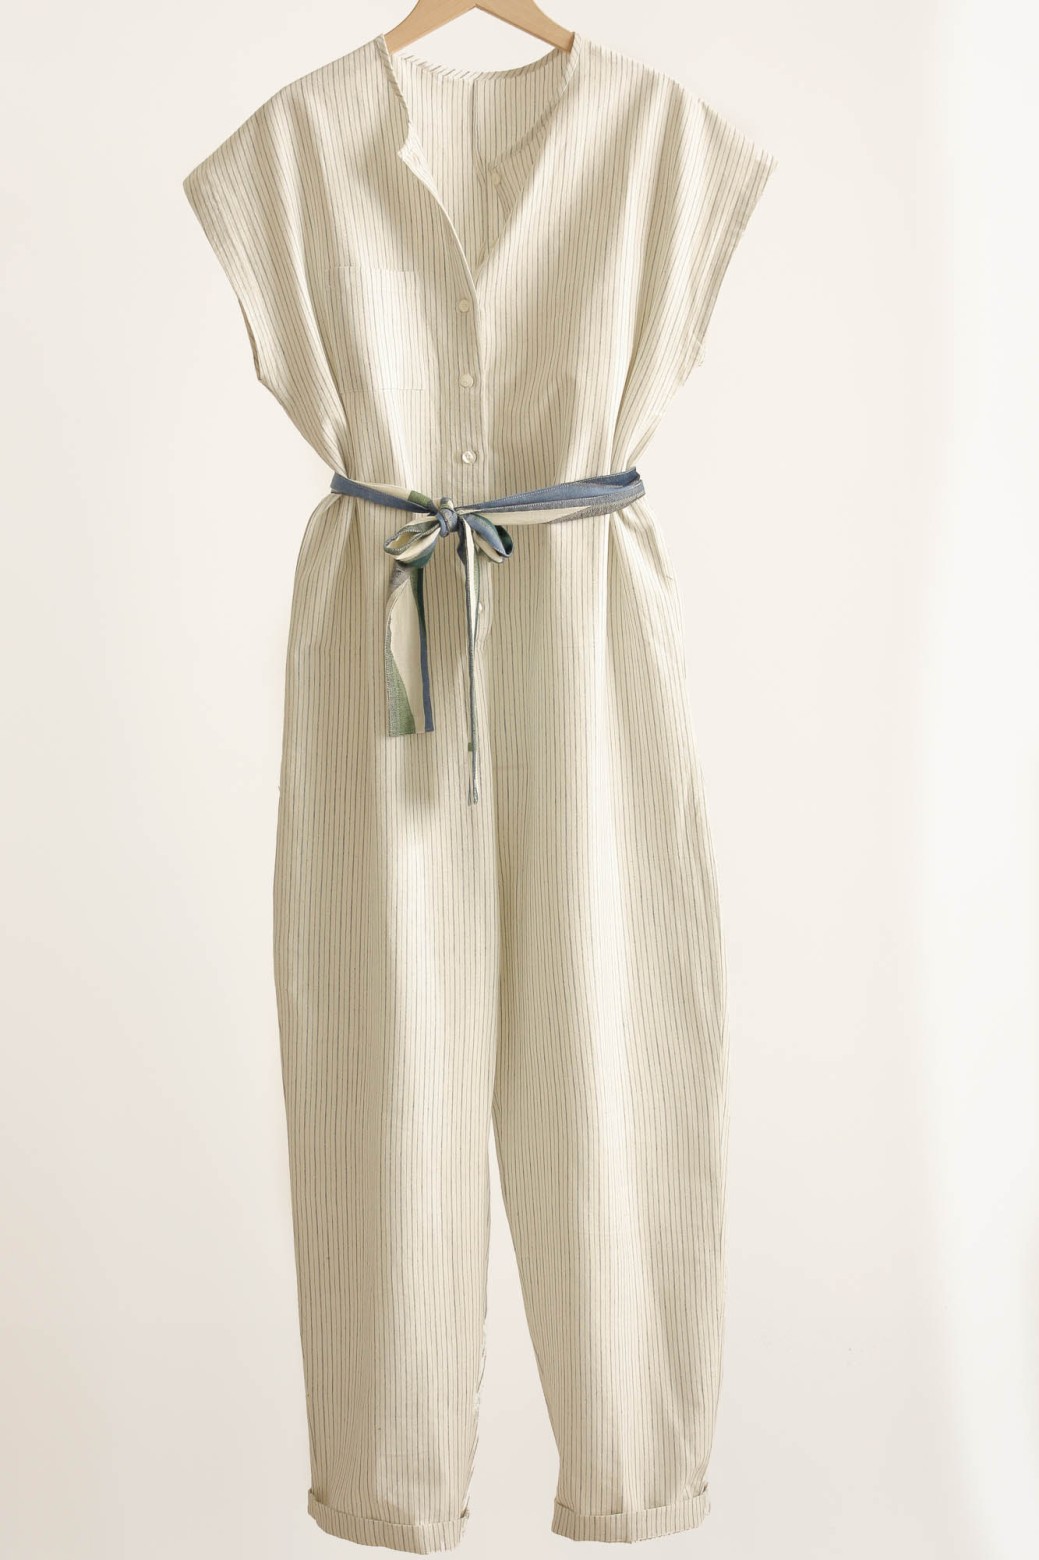 Messina Discoball Natural Jumpsuit 2x